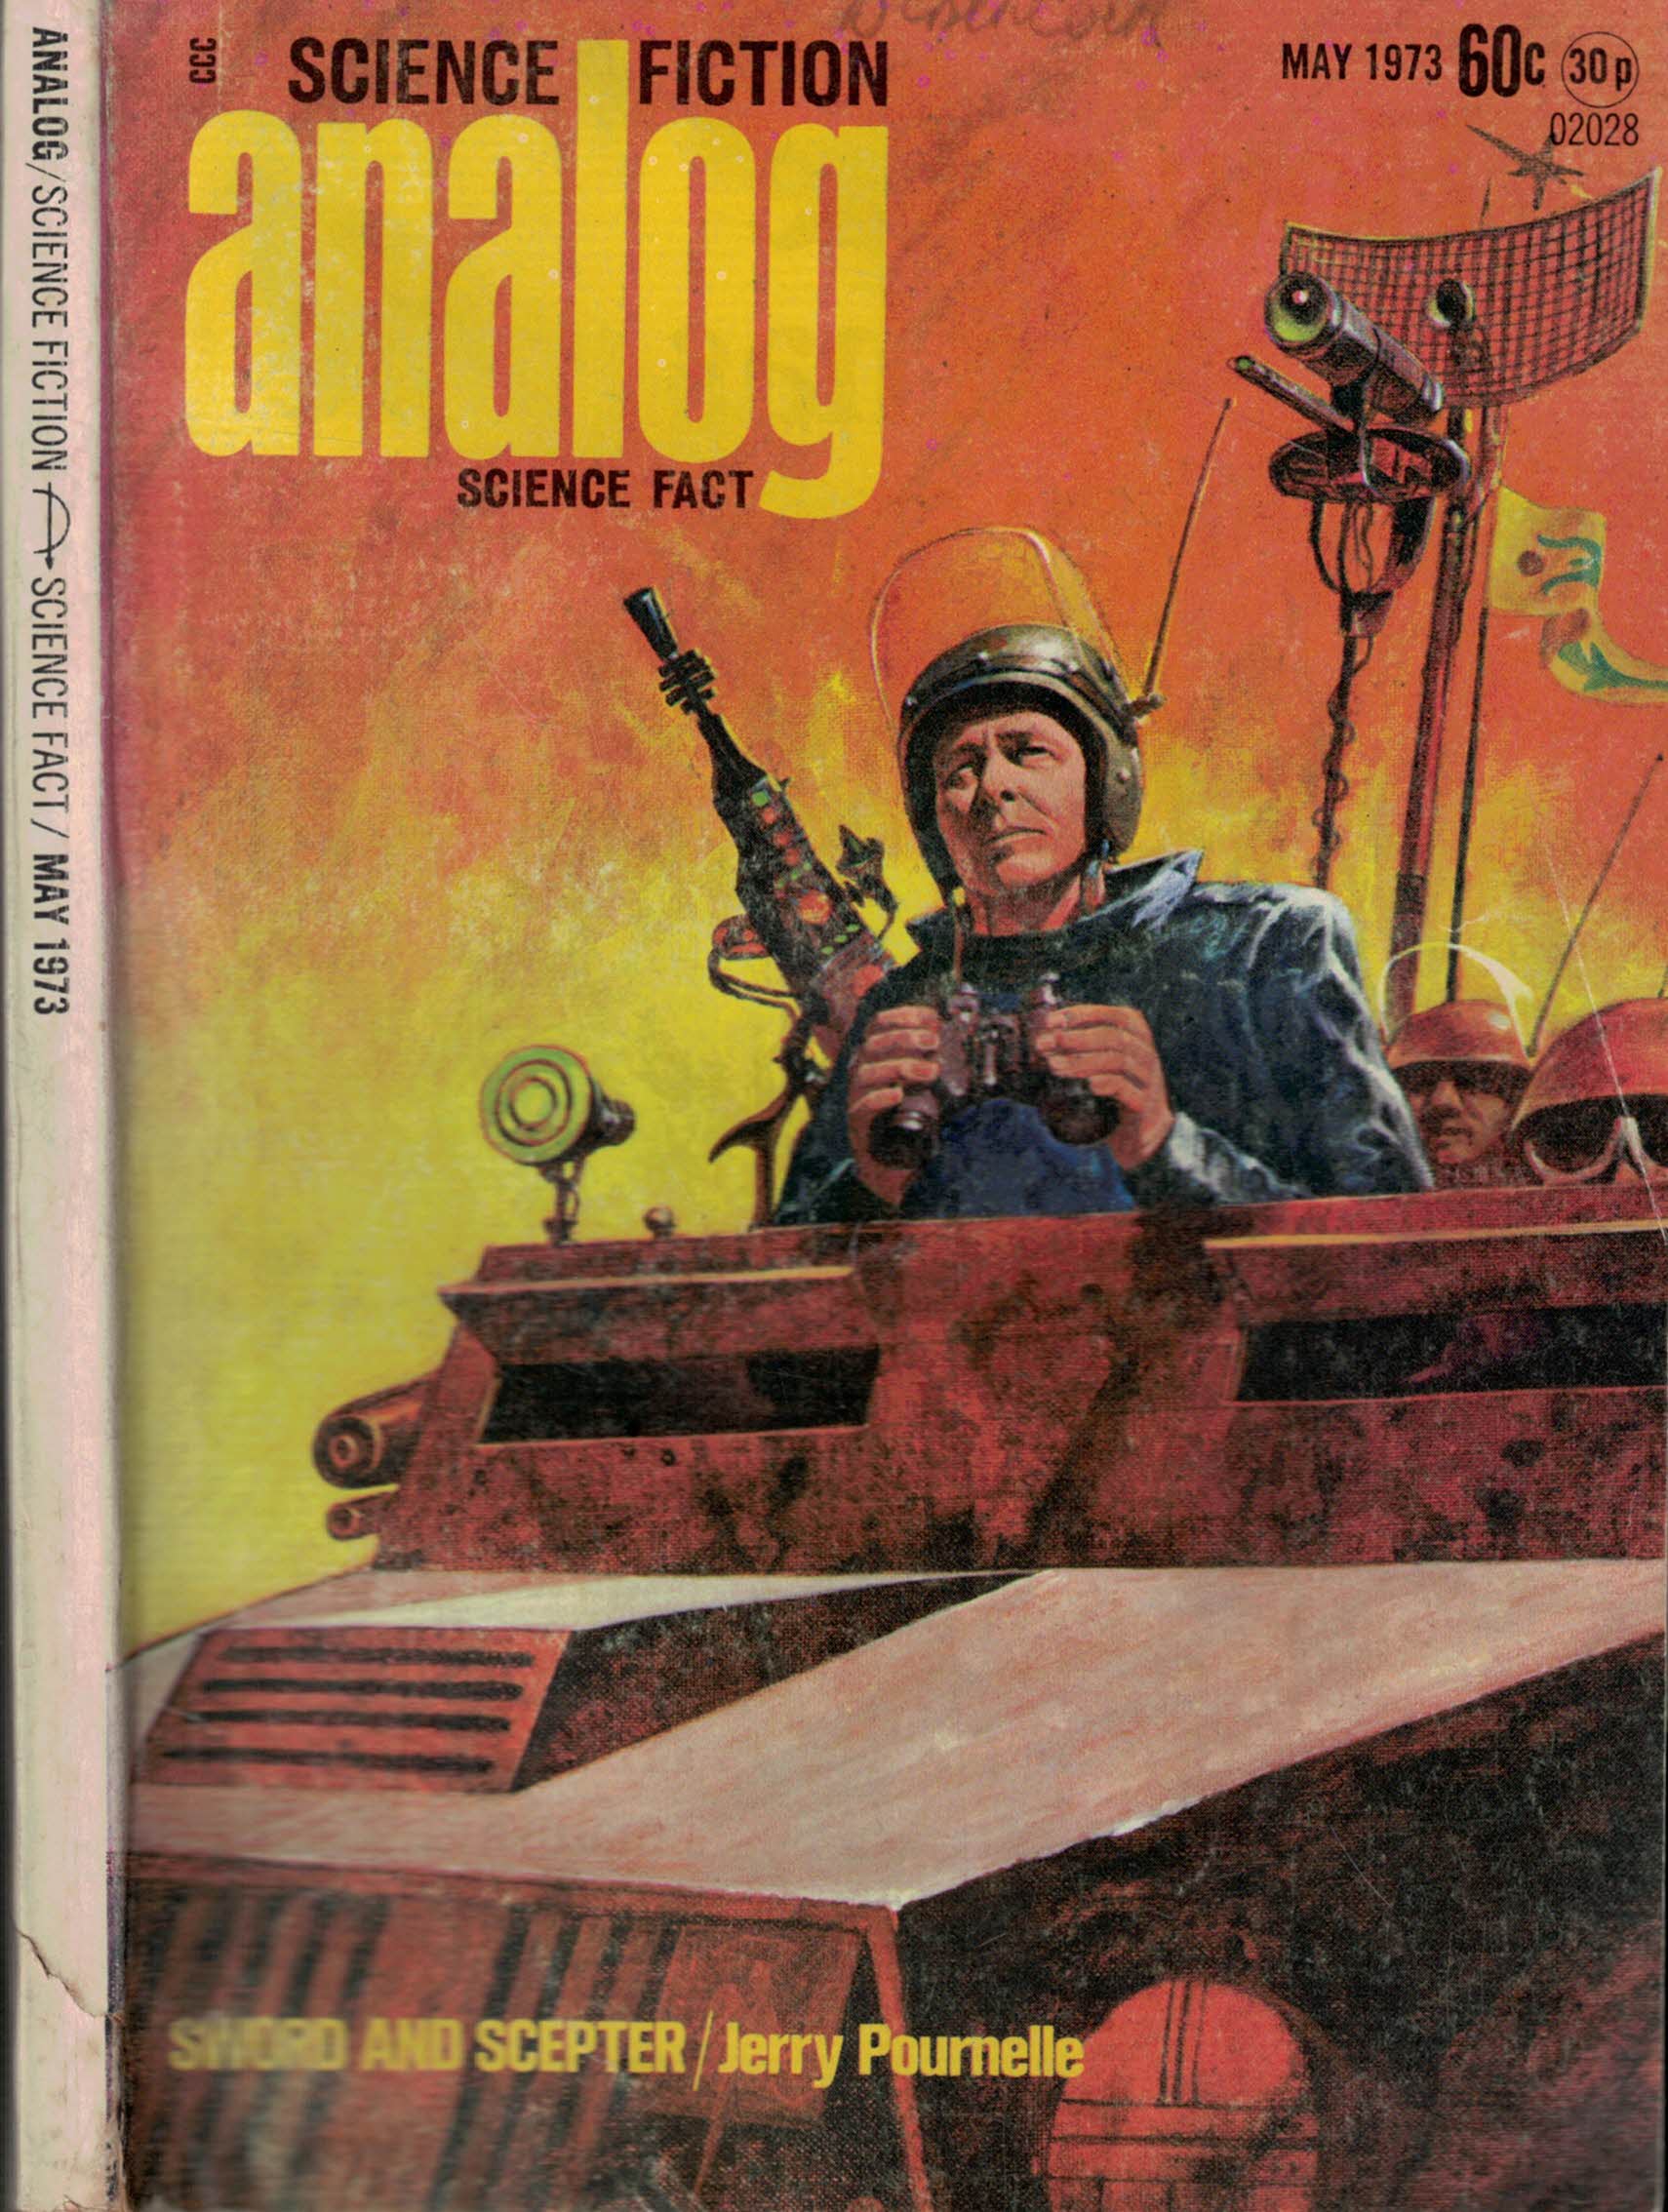 Analog. Science Fiction and Fact. Volume 93, Number 3. May 1973.